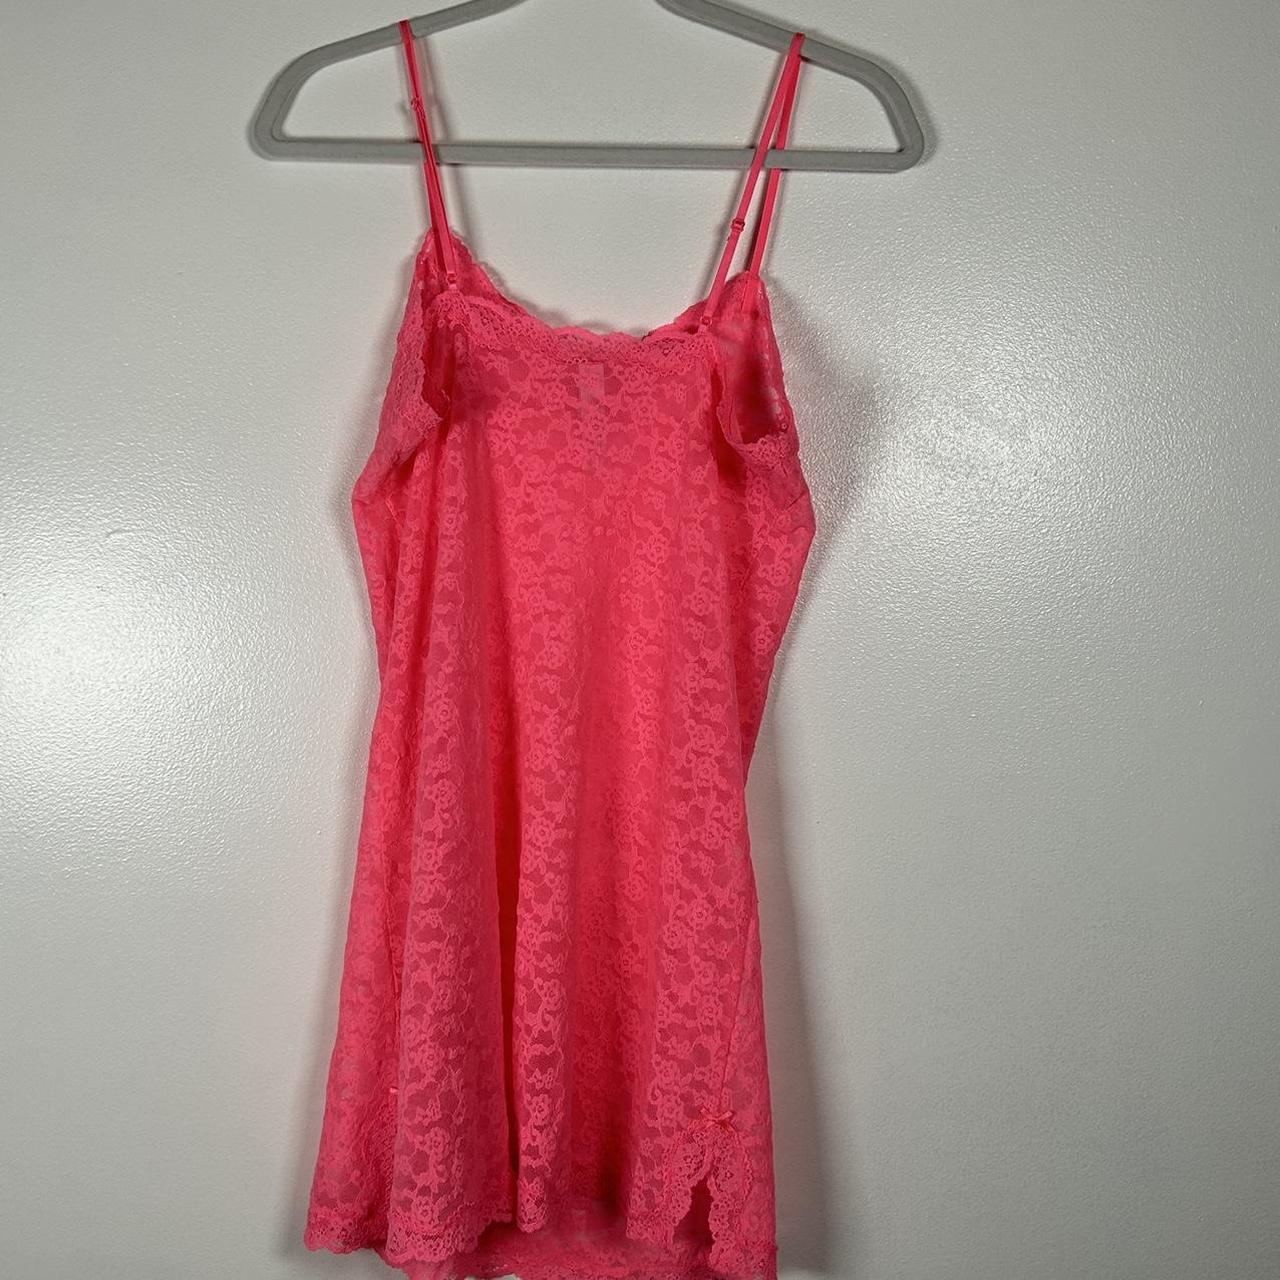 Hot pink lace slip dress Great condition! - Depop